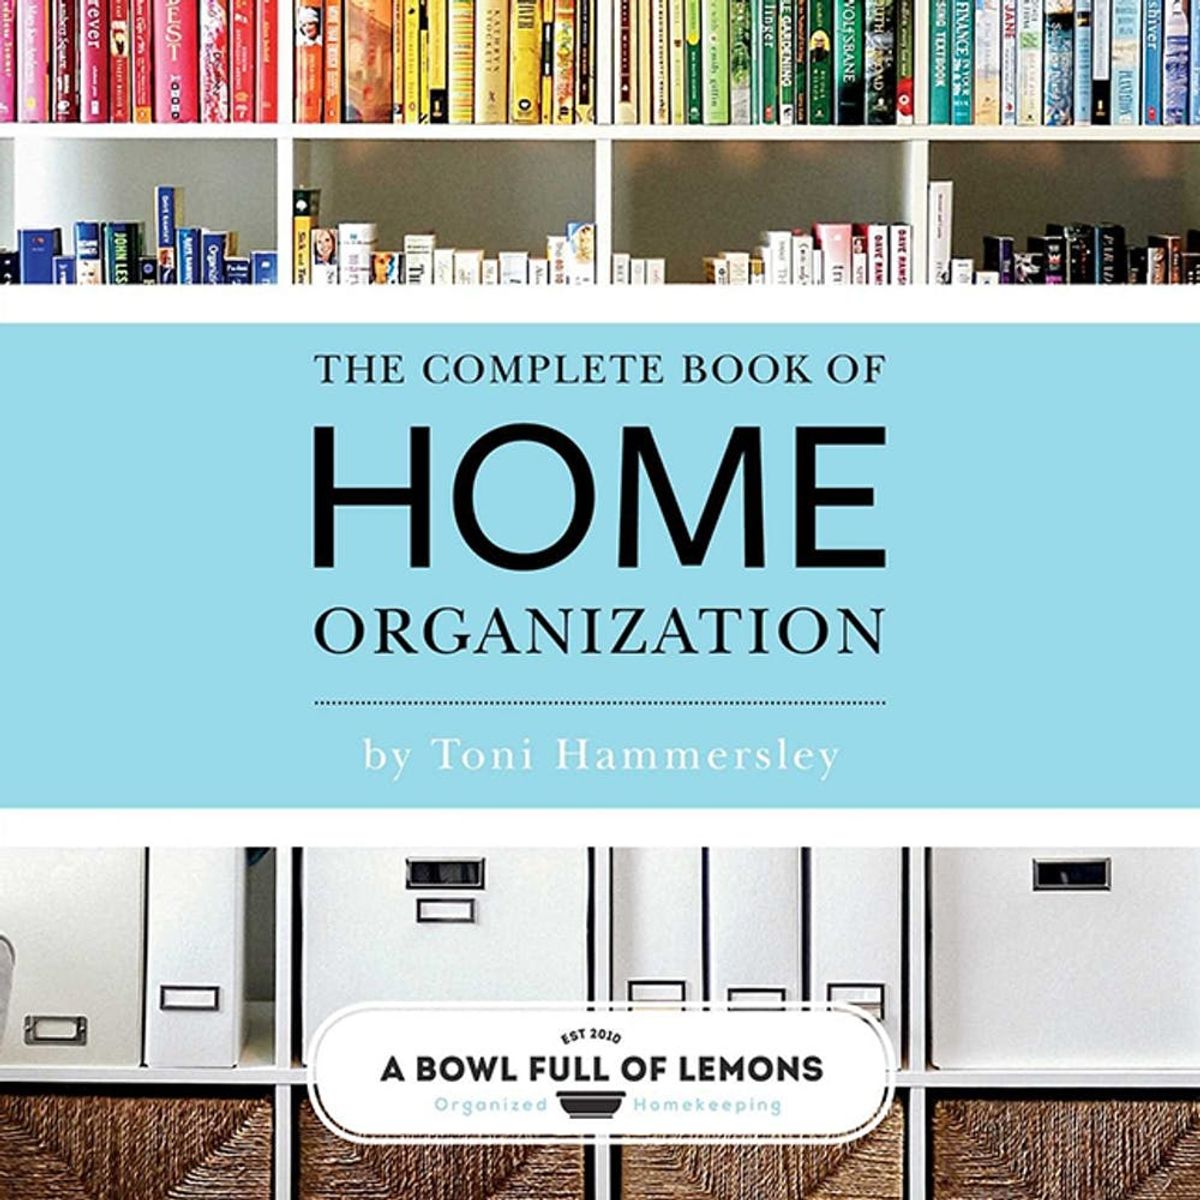 5 Organization Books for Moms Who Are Tired of a Messy Home